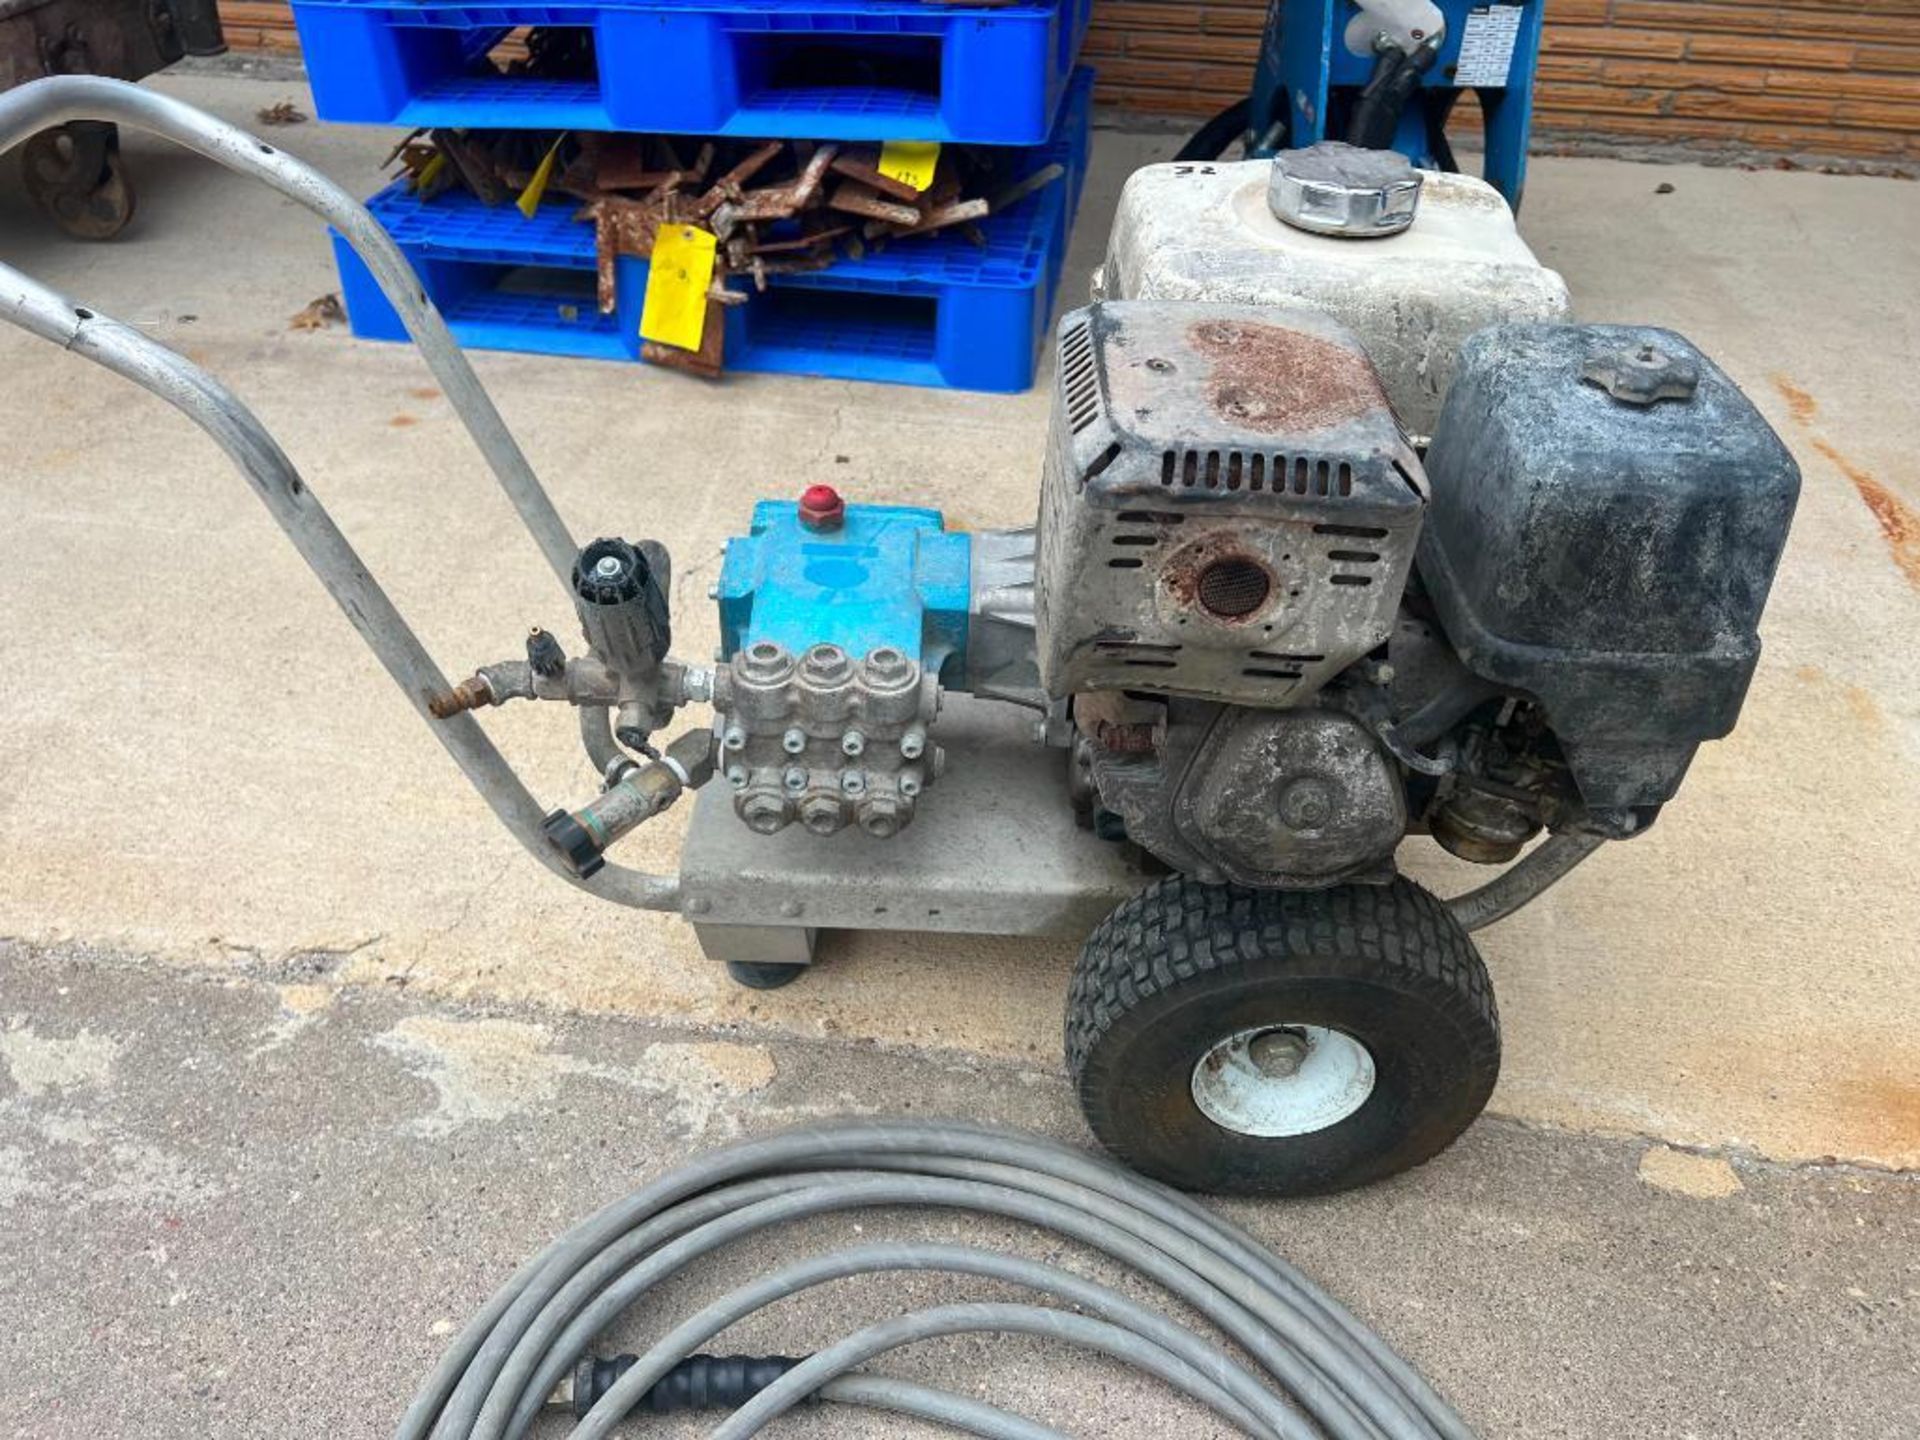 Honda Pressure Washer with Hose & Wand. Located in Mt. Pleasant, IA - Image 7 of 8